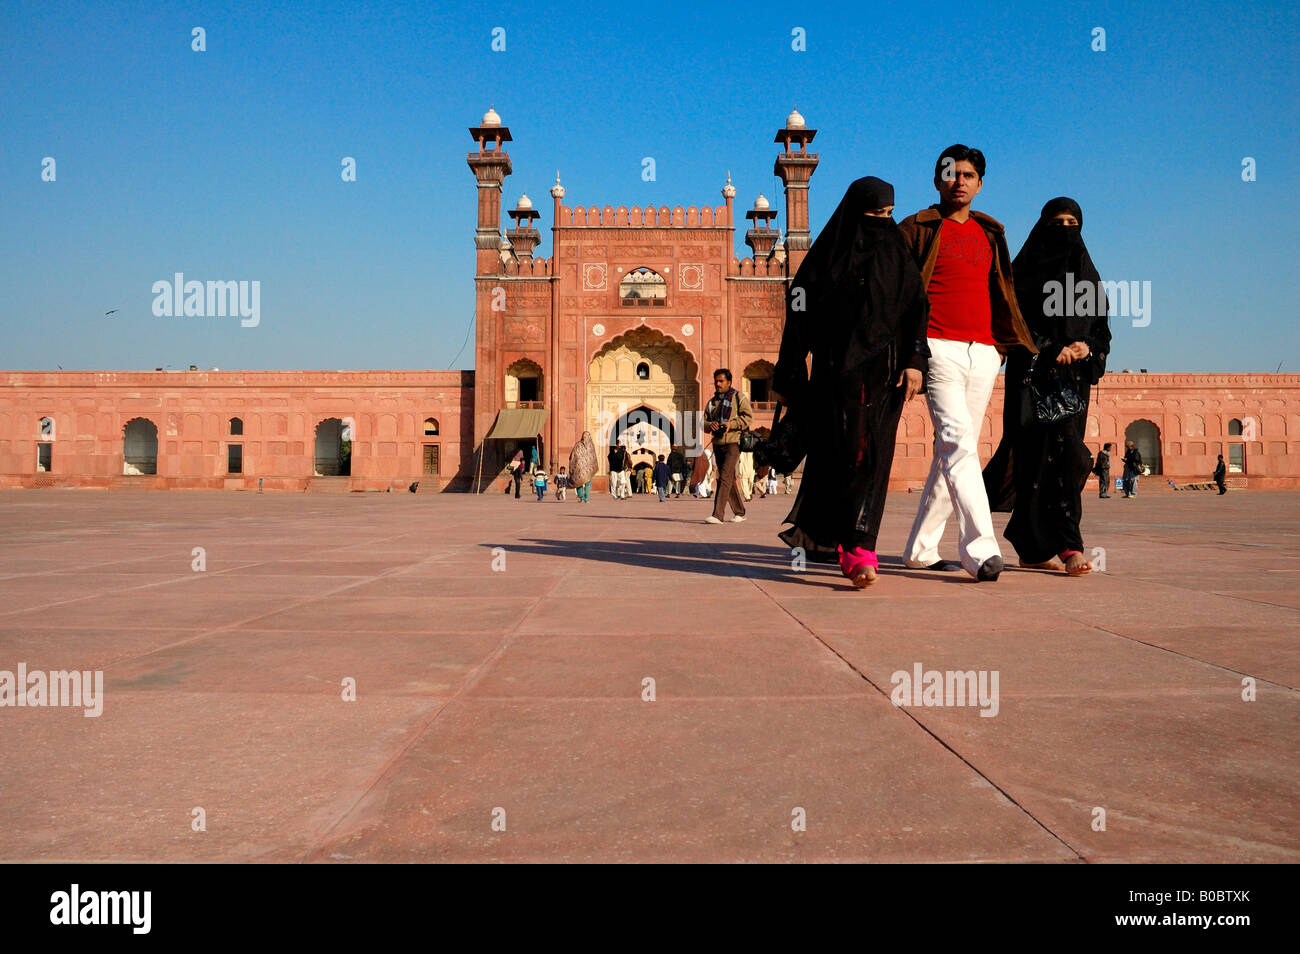 Badshahi Mosque stands across the Hazuri Bagh from Lahore Fort. Pakistan. Muslim worshippers. Stock Photo